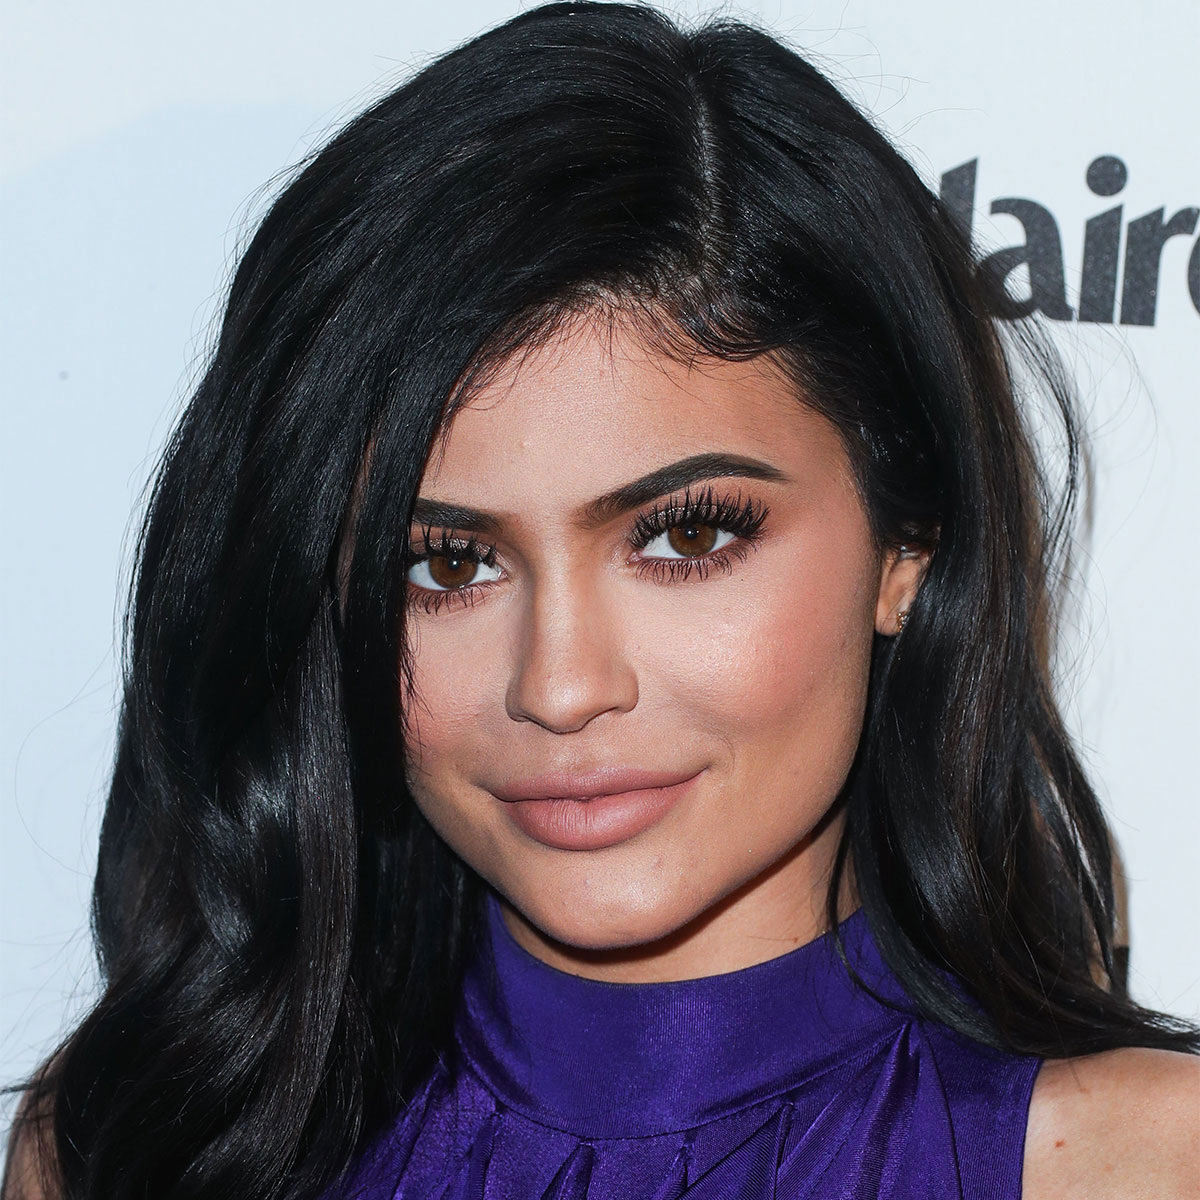 Kylie Jenner is entering her 'quiet luxury' style era - see photos